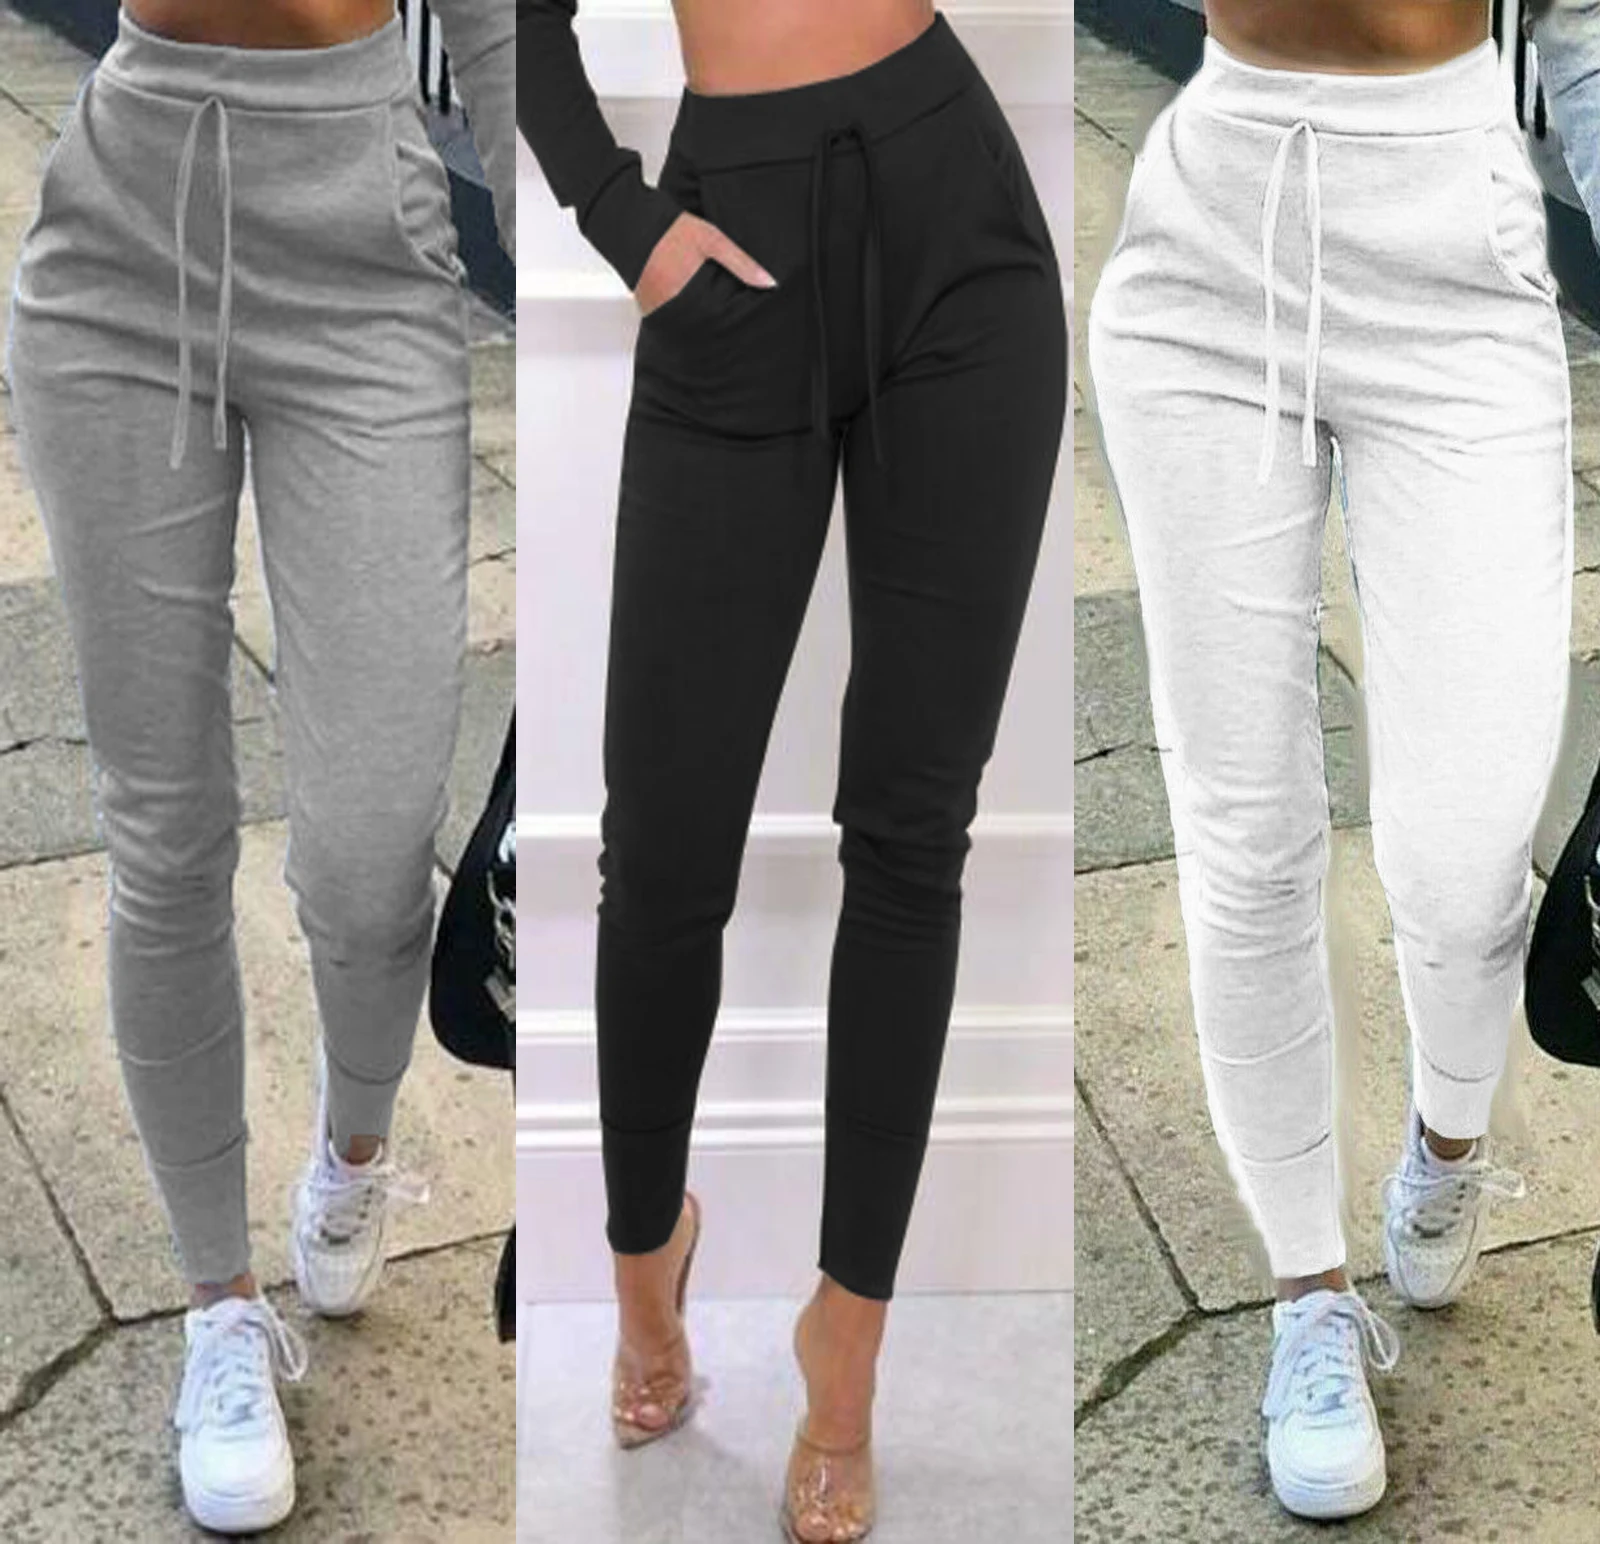 

2020 New Arrivals Women's Pants Jogger Casual Solid Color Sport Pants Elastic Waist Ankle Cuff Tight Sweatpants with Pocket